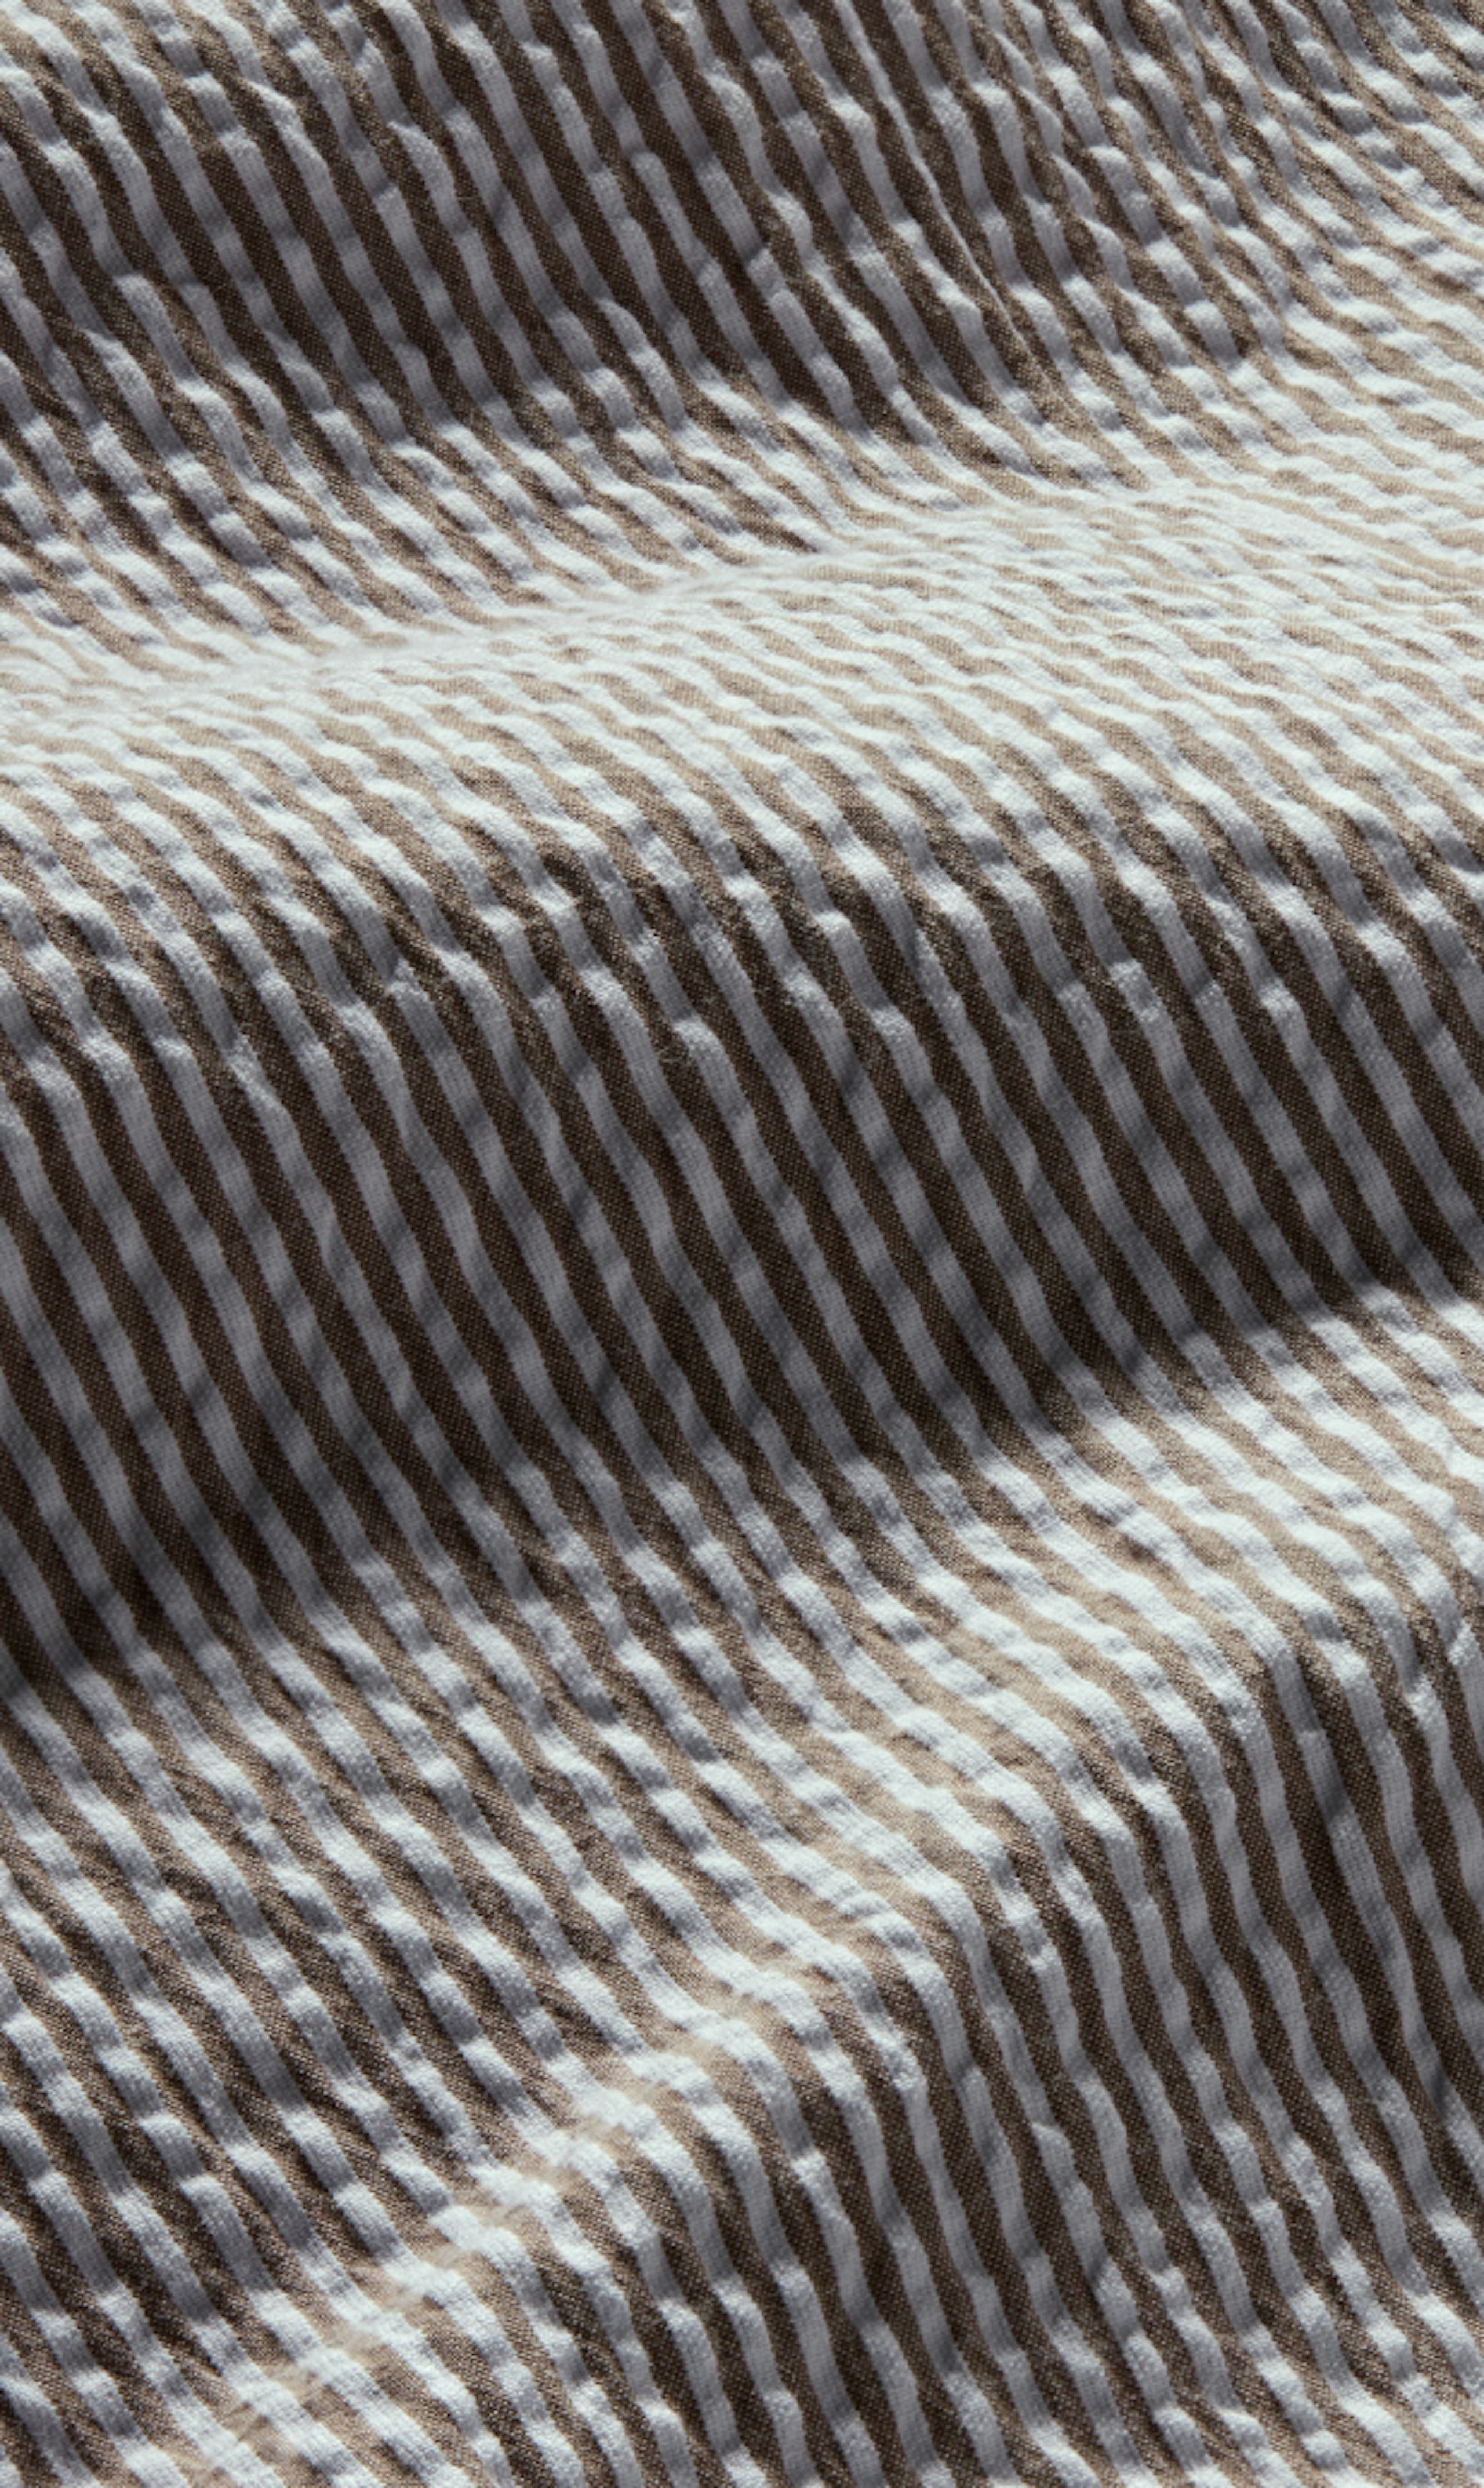 image of cotton and chambray fabric